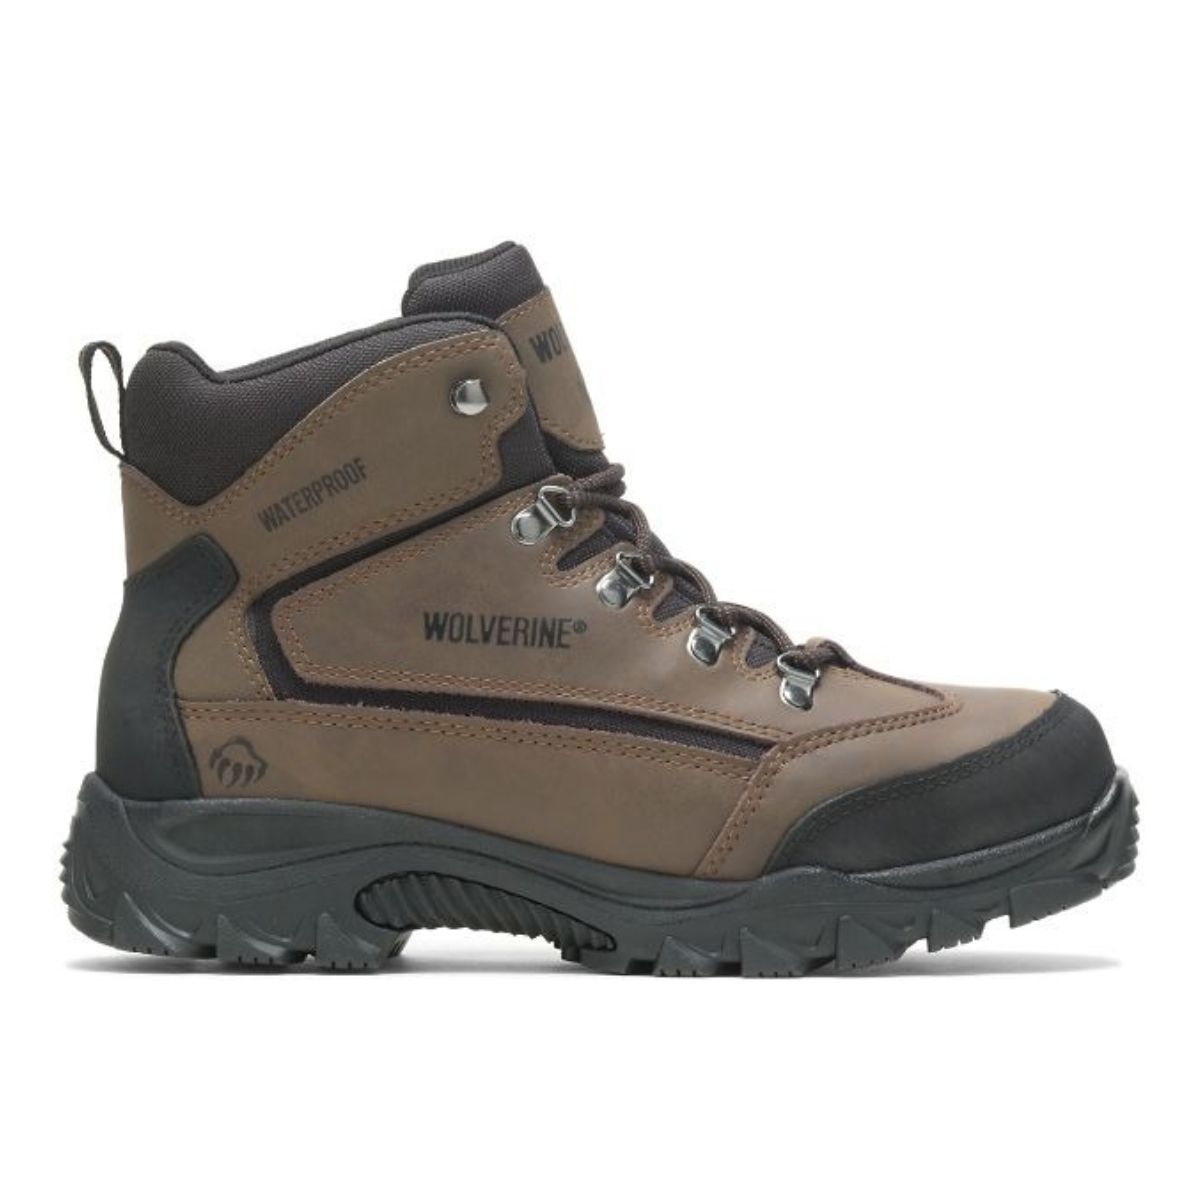 Spencer Hiking Boot